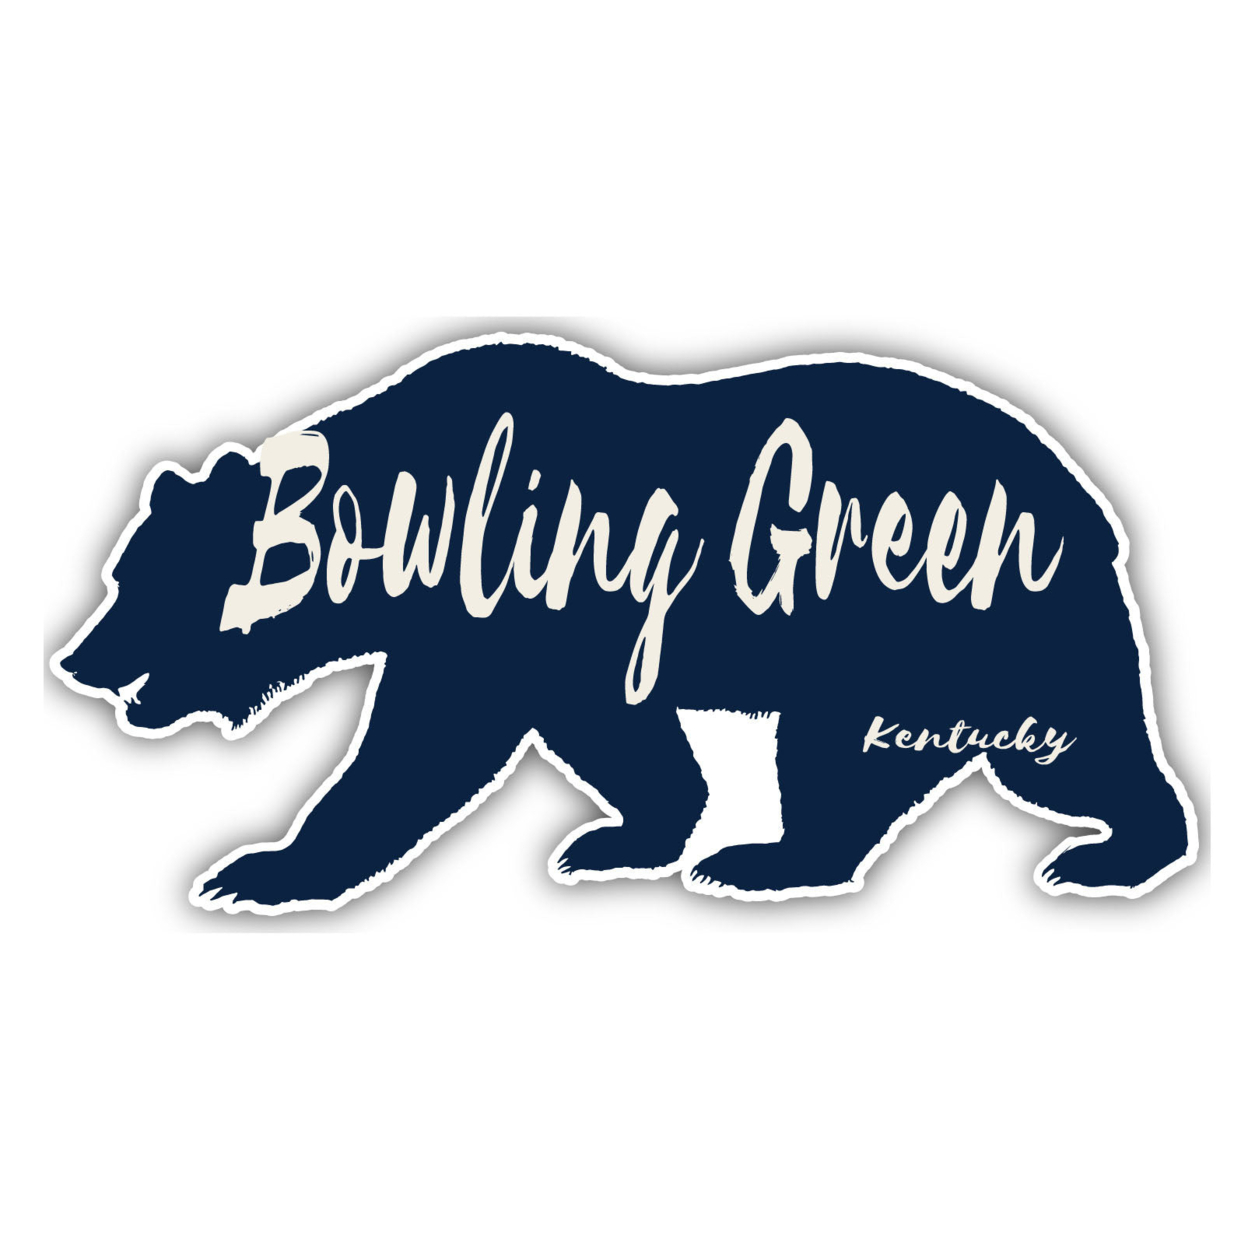 Bowling Green Kentucky Souvenir Decorative Stickers (Choose Theme And Size) - 4-Pack, 4-Inch, Bear